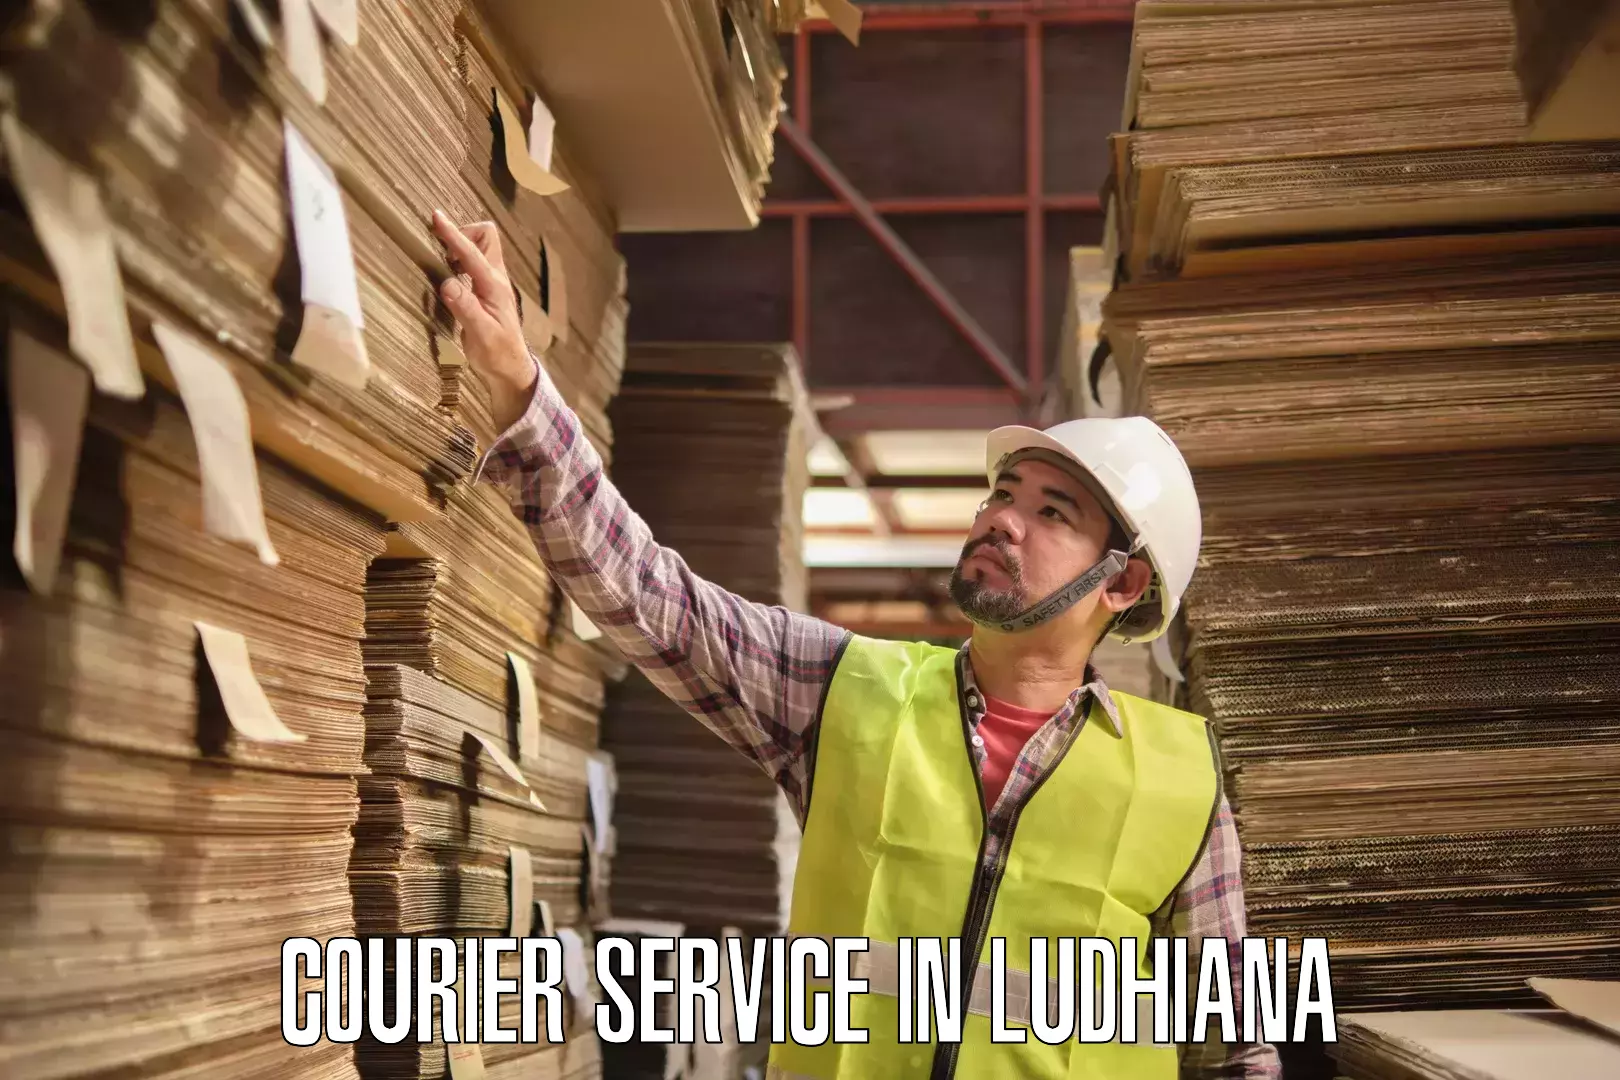 Global shipping networks in Ludhiana